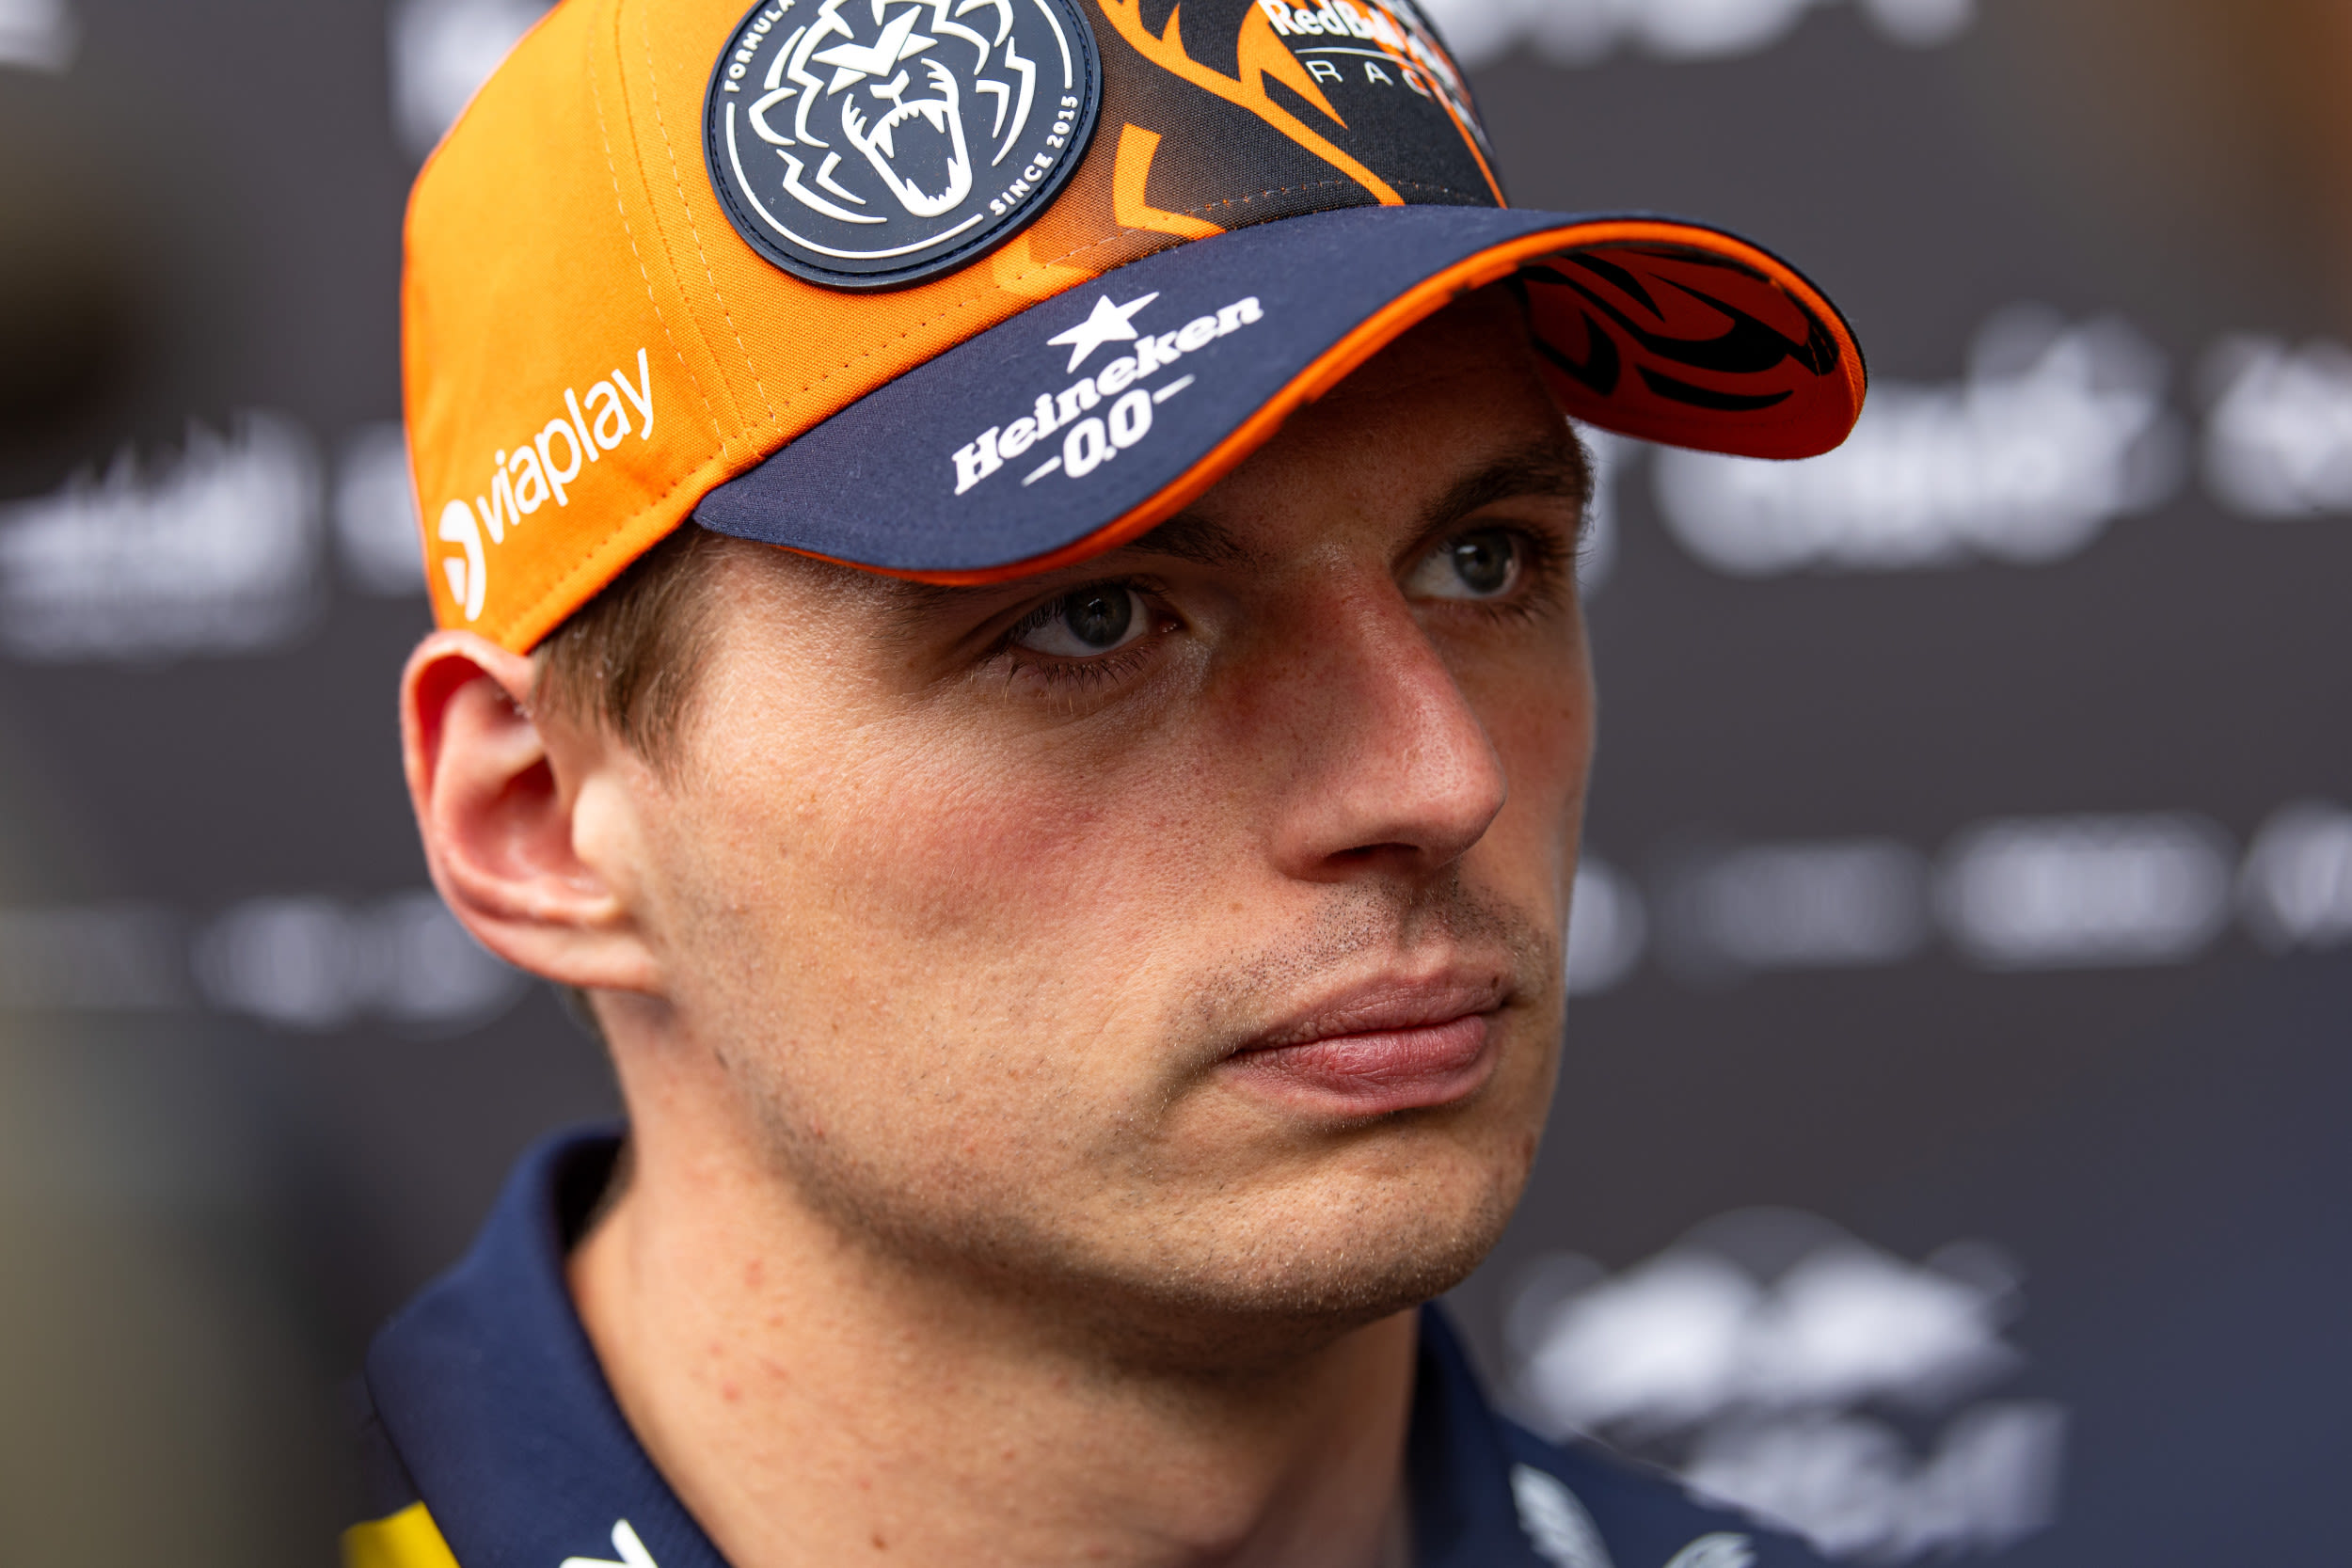 F1 News: Max Verstappen Radio Language Prompts Response From Formula One CE